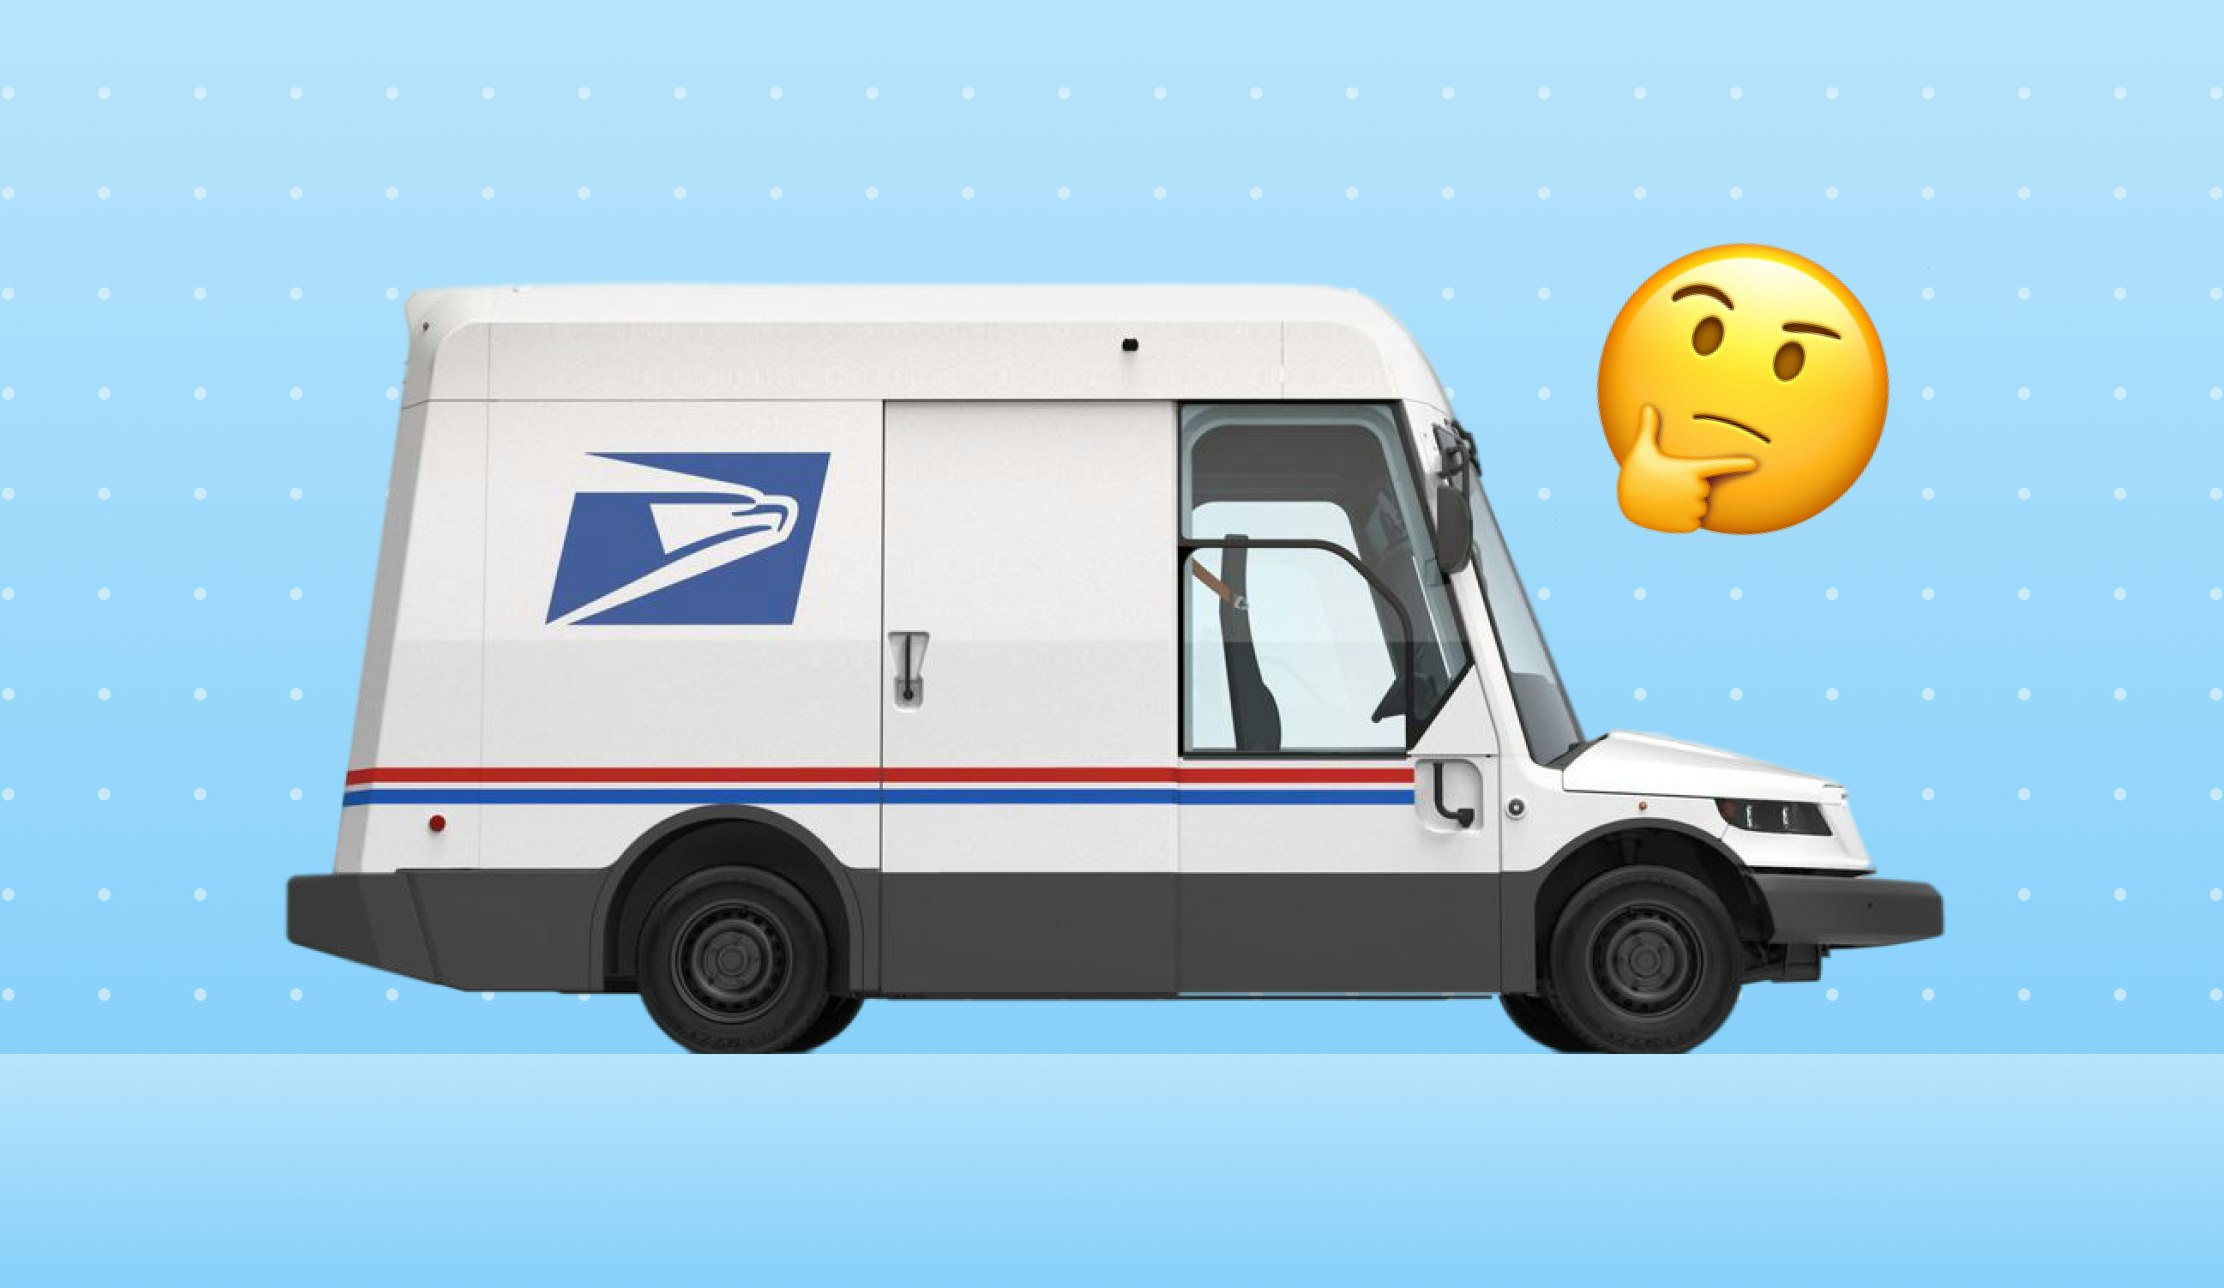 USPS courier truck with a thinking face emoji